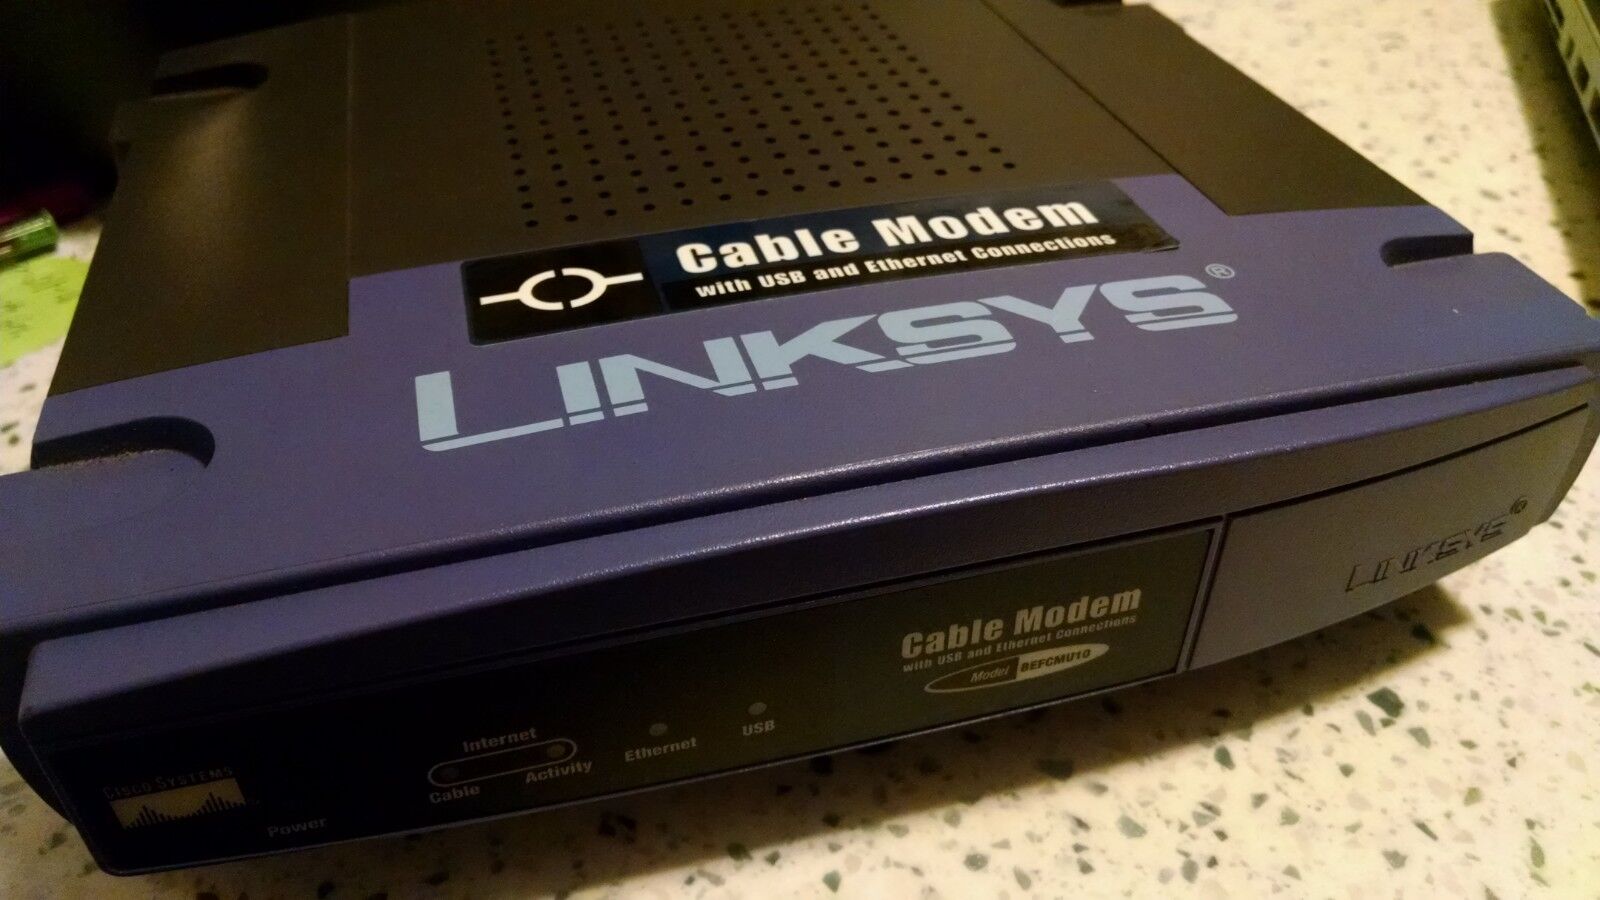 Linksys Cisco Cable Modem Model BEFCMU10 ver 3 with USB/Ethernet Connections 